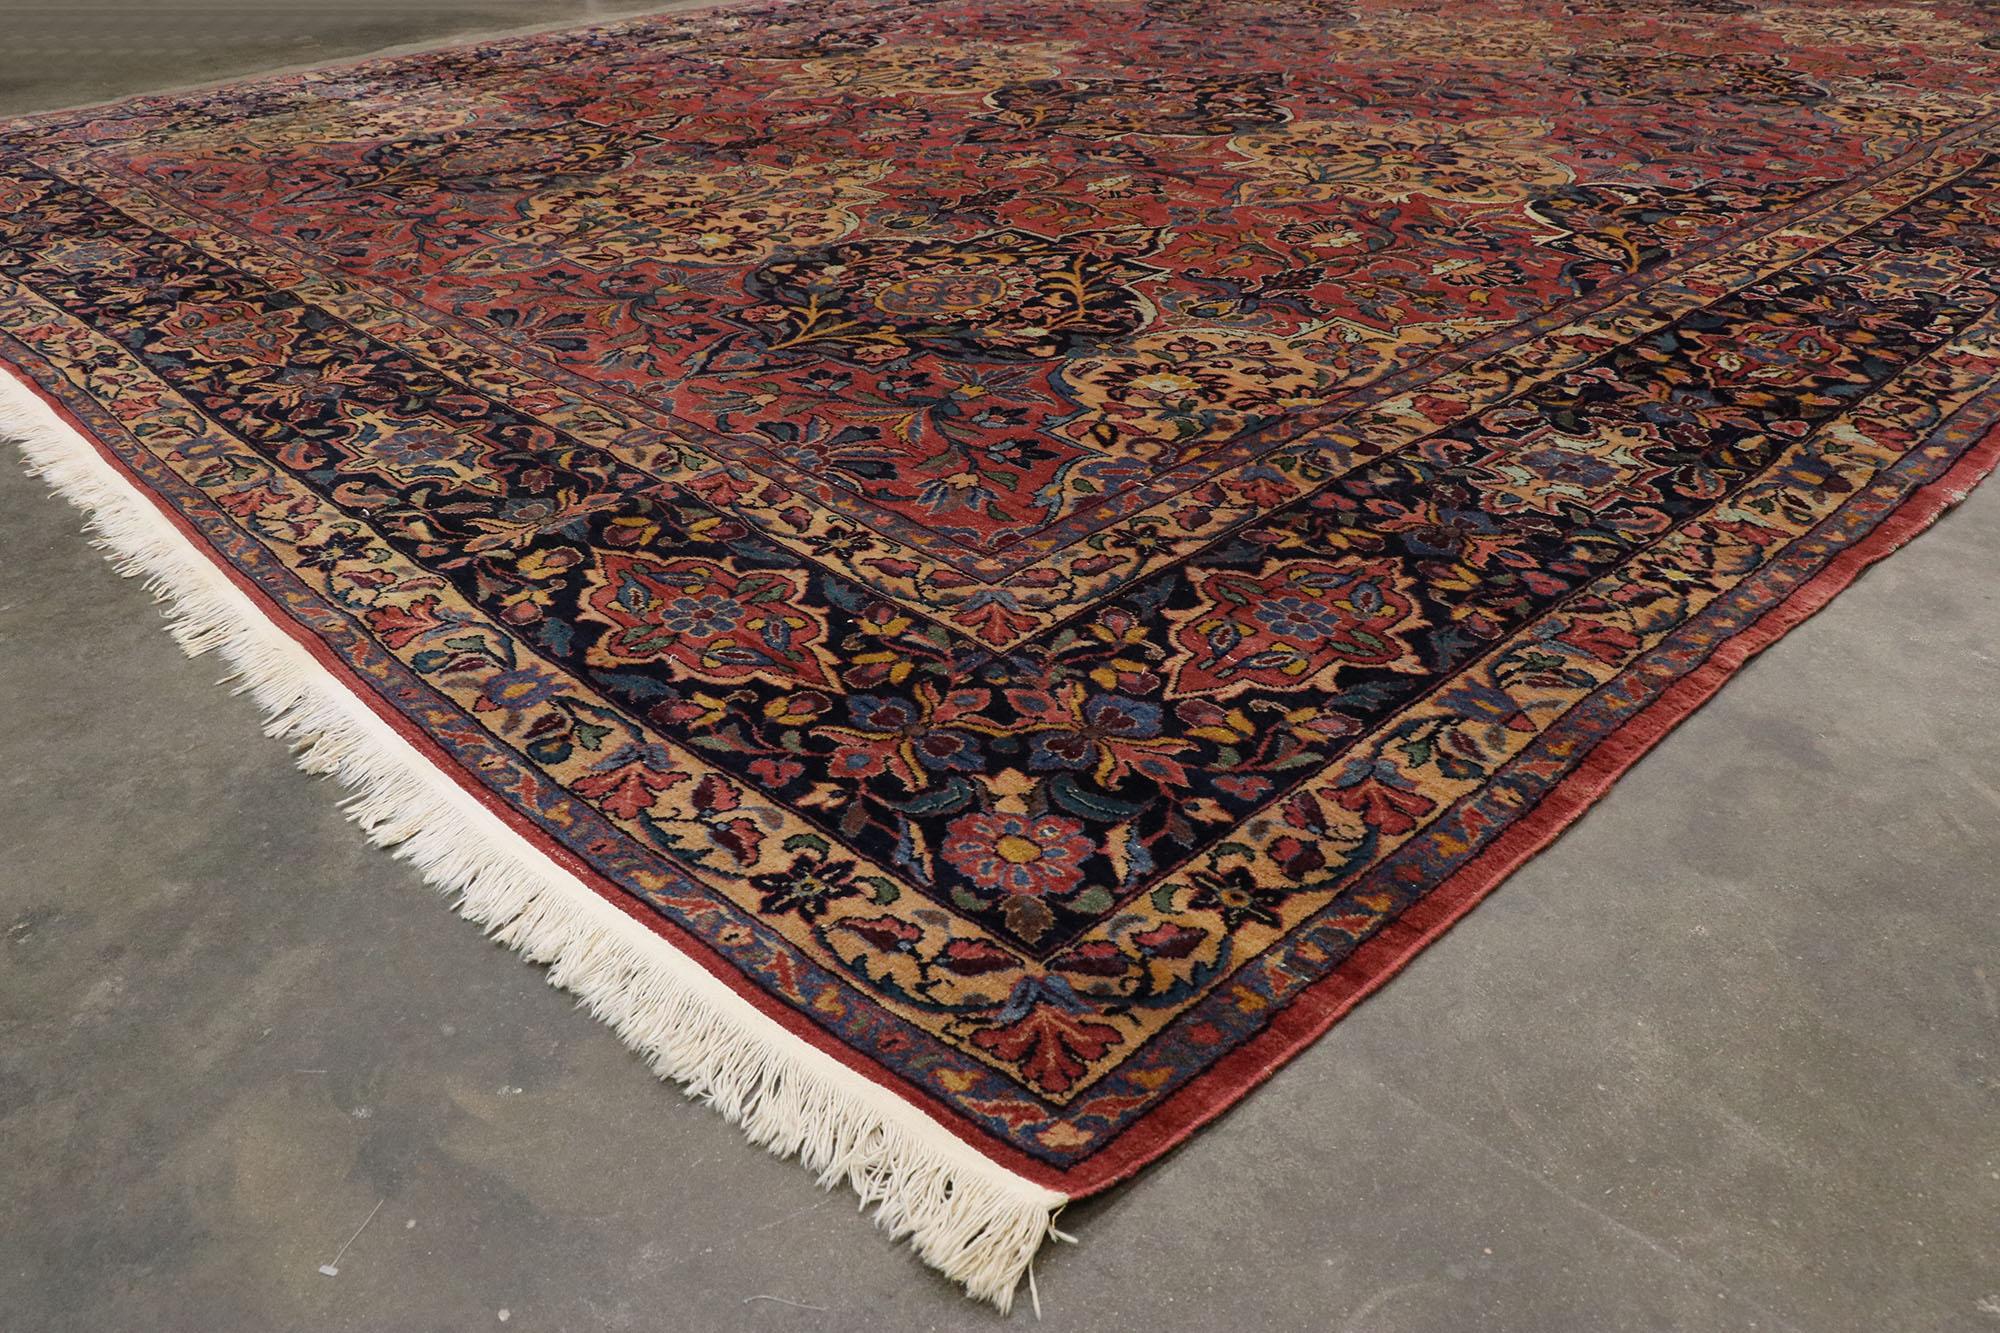 Antique Persian Lilihan Rug with Victorian Renaissance Style In Good Condition For Sale In Dallas, TX